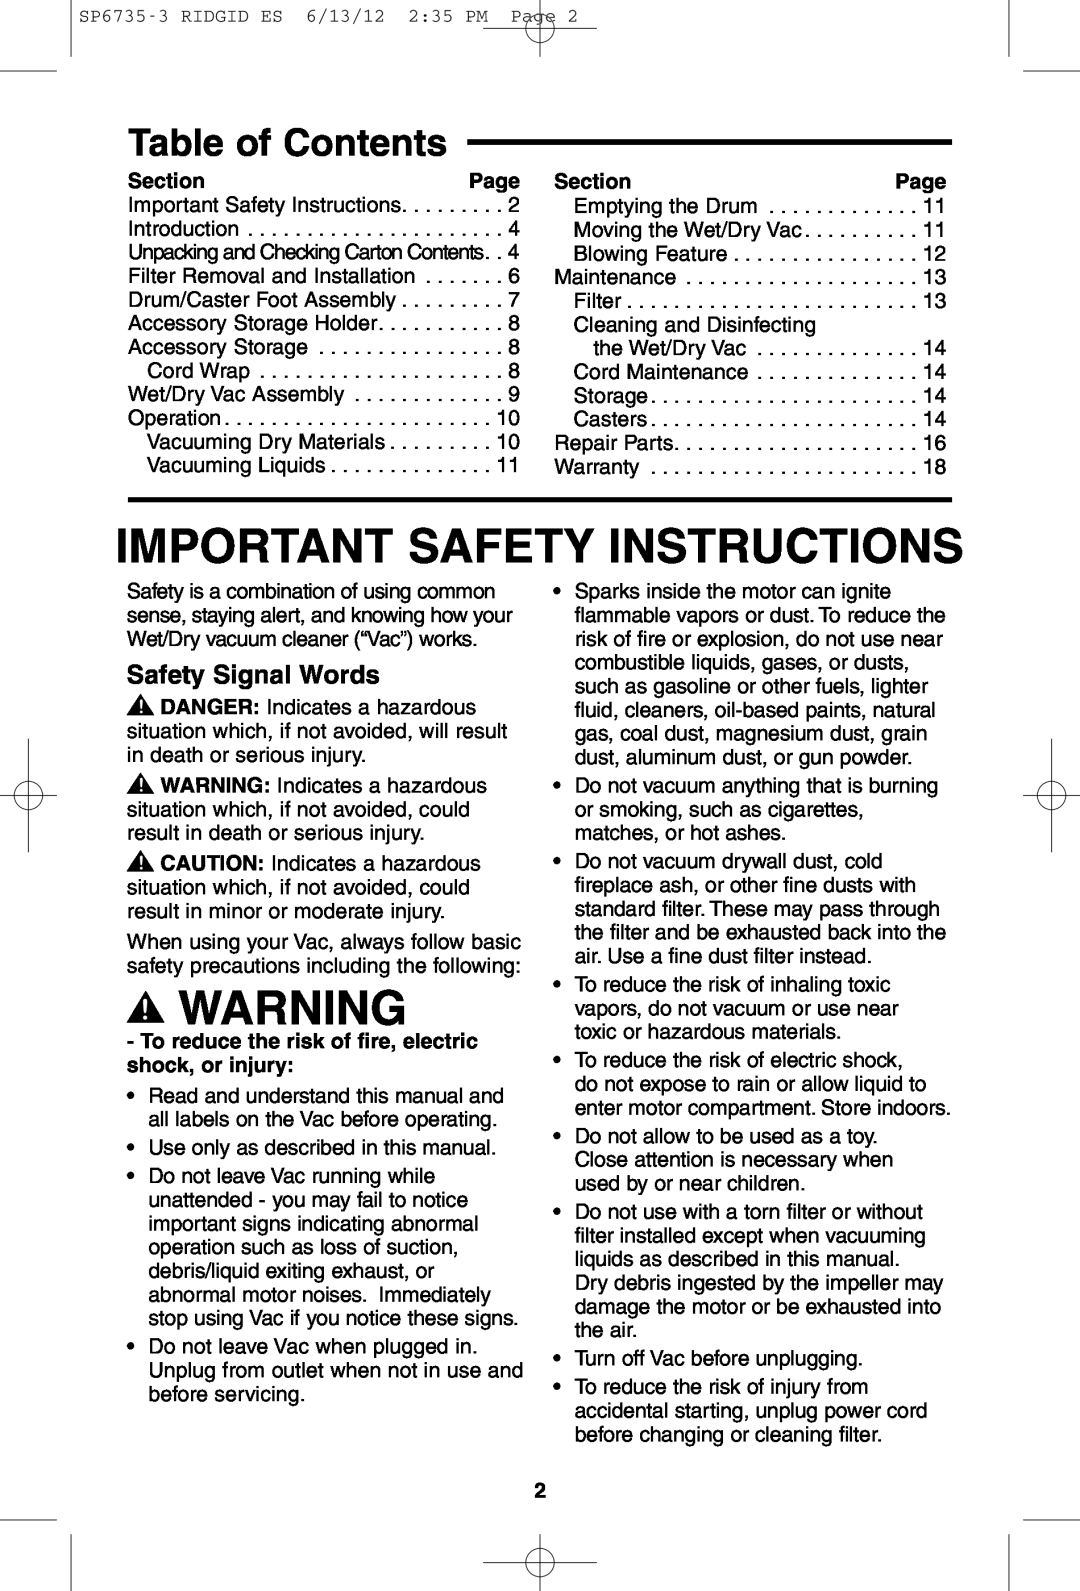 RIDGID WD14500 owner manual Important Safety Instructions, Table of Contents, Safety Signal Words 